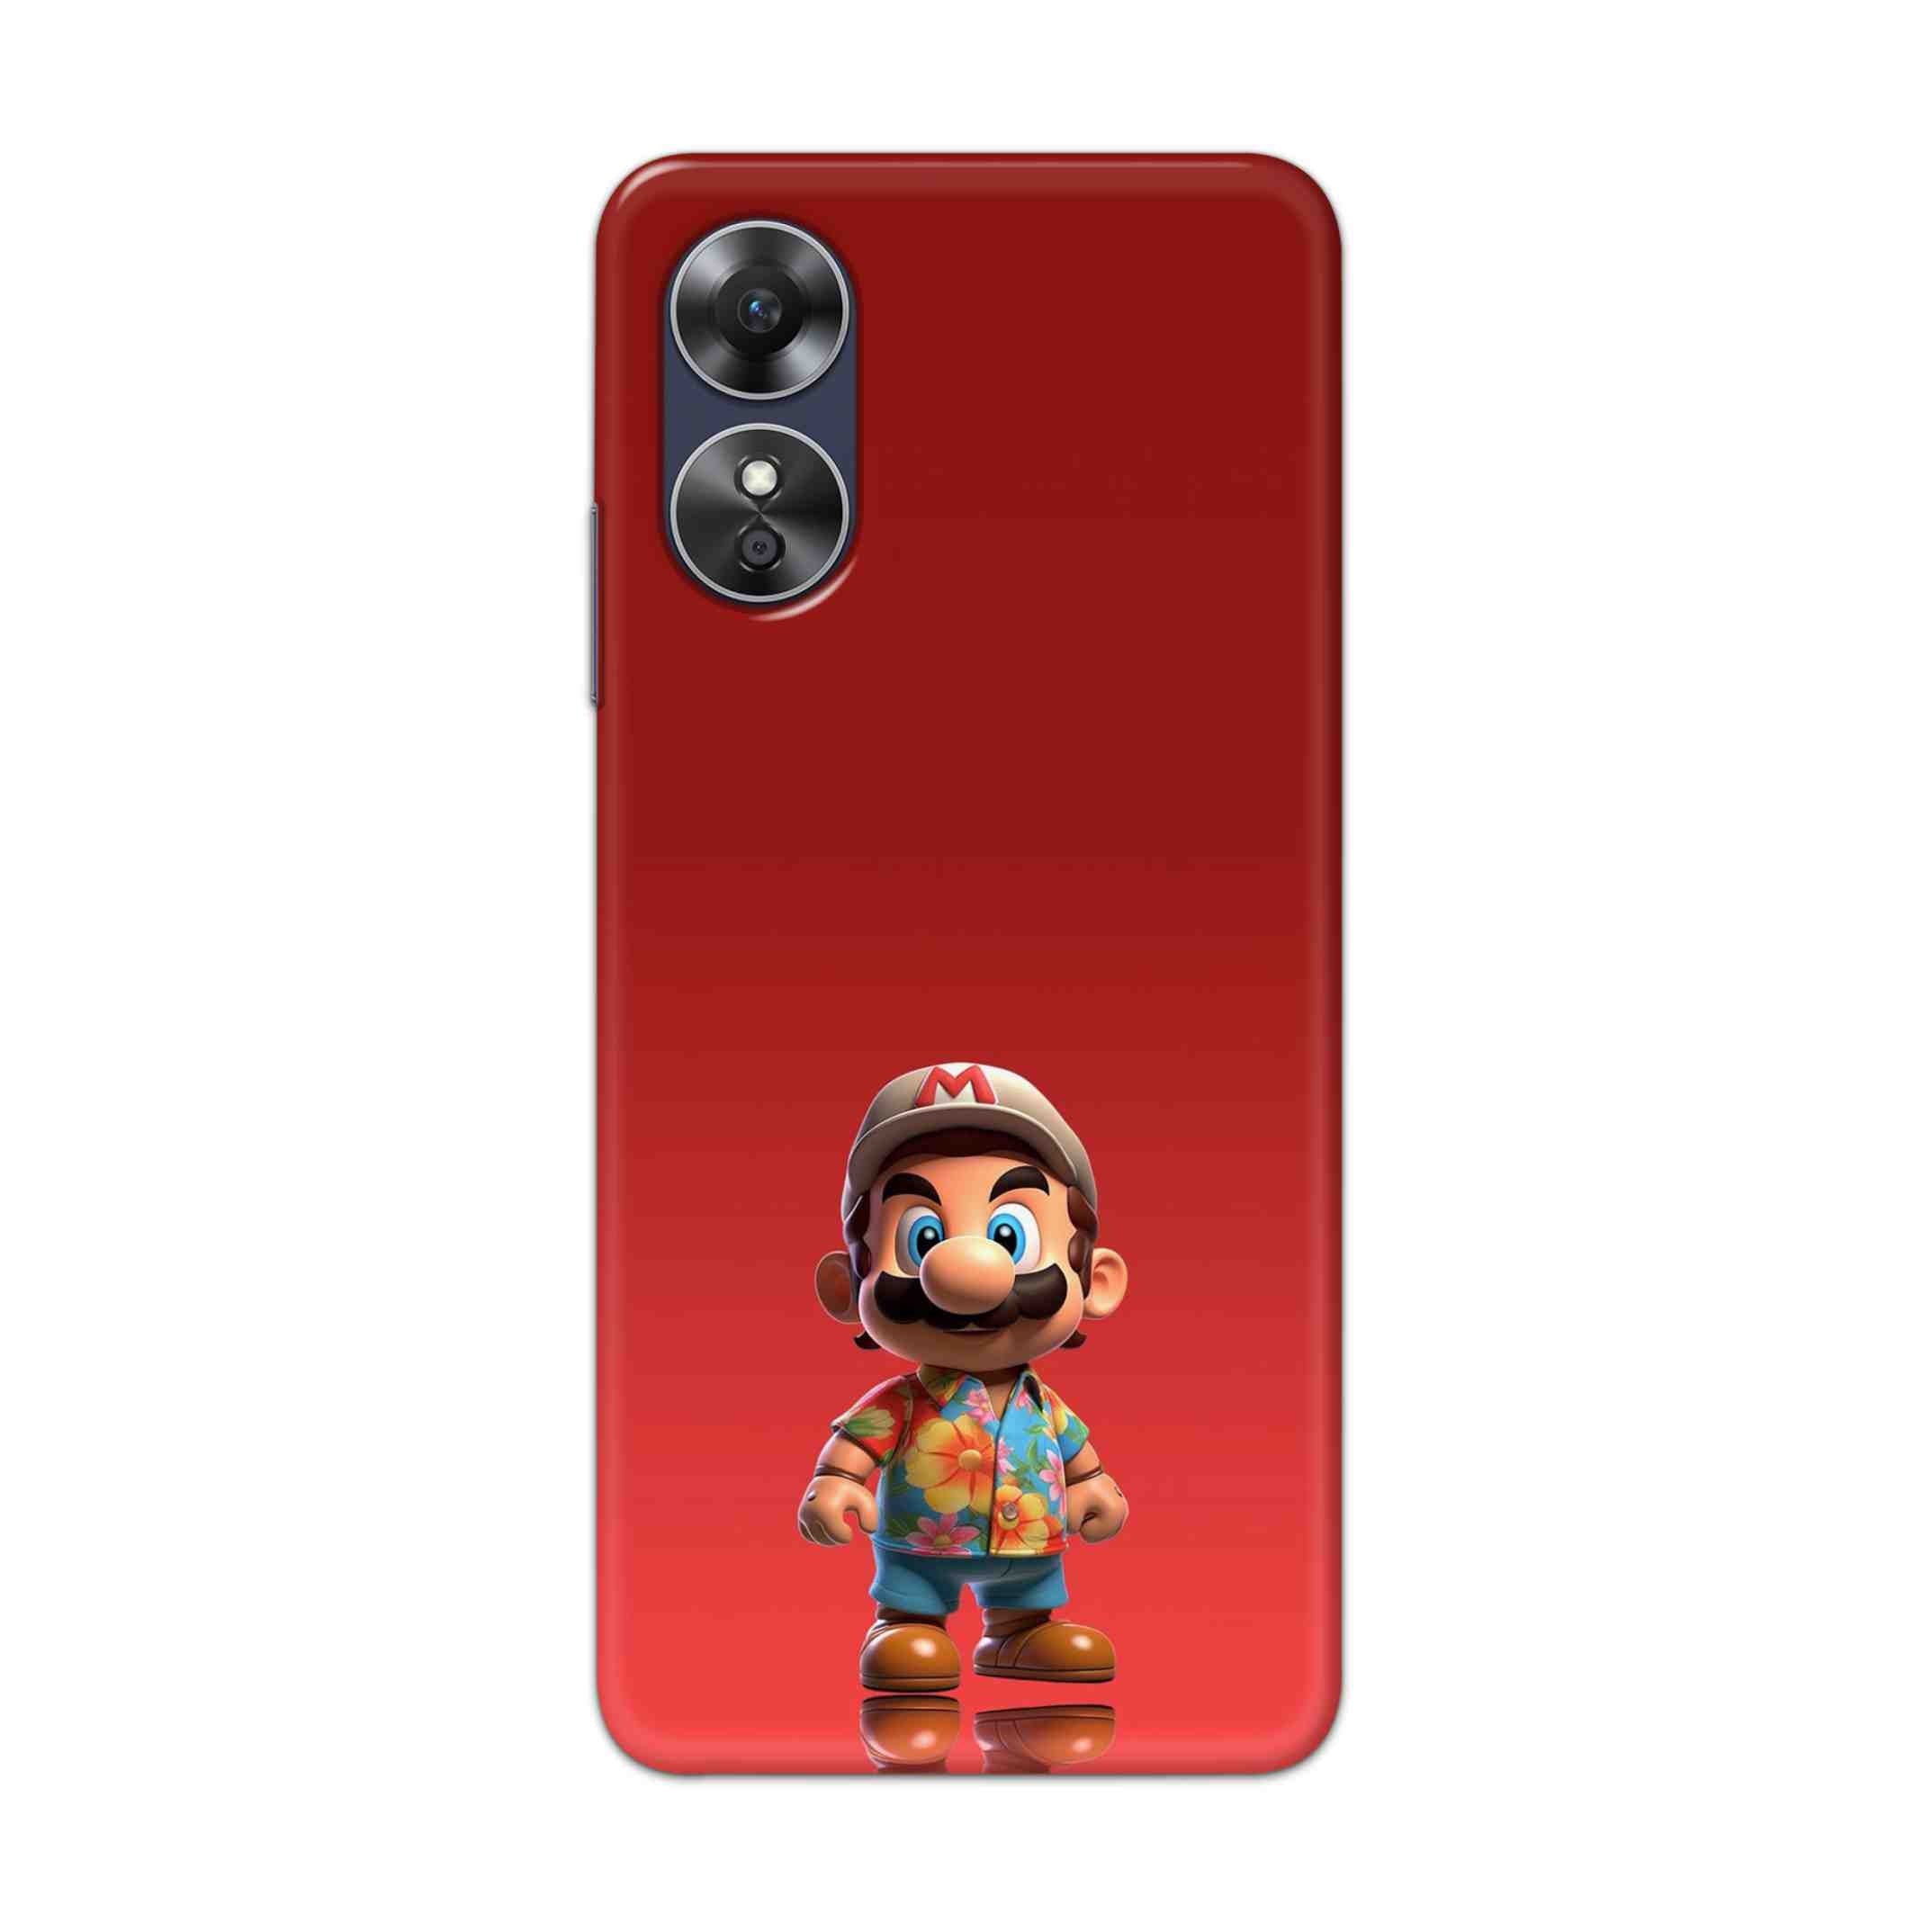 Buy Mario Hard Back Mobile Phone Case Cover For Oppo A17 Online